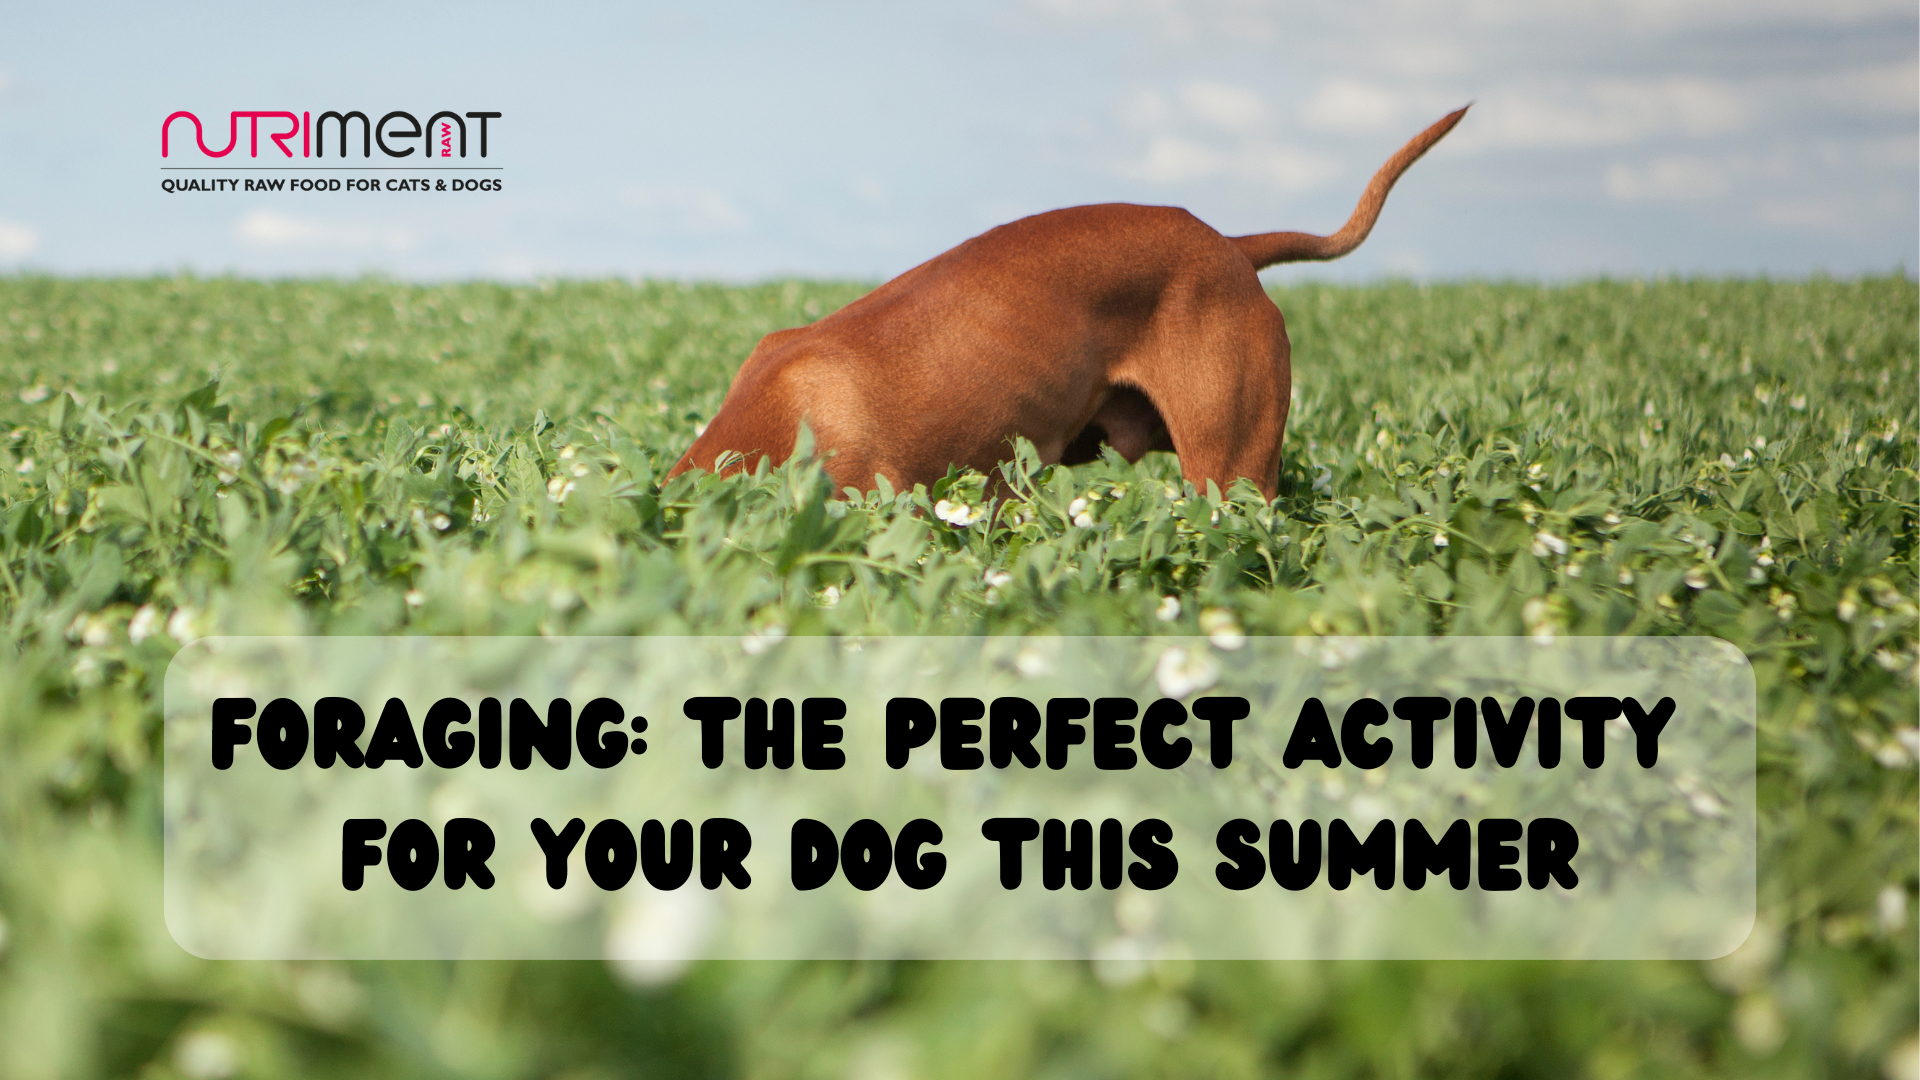 Let your dog forage this summer!